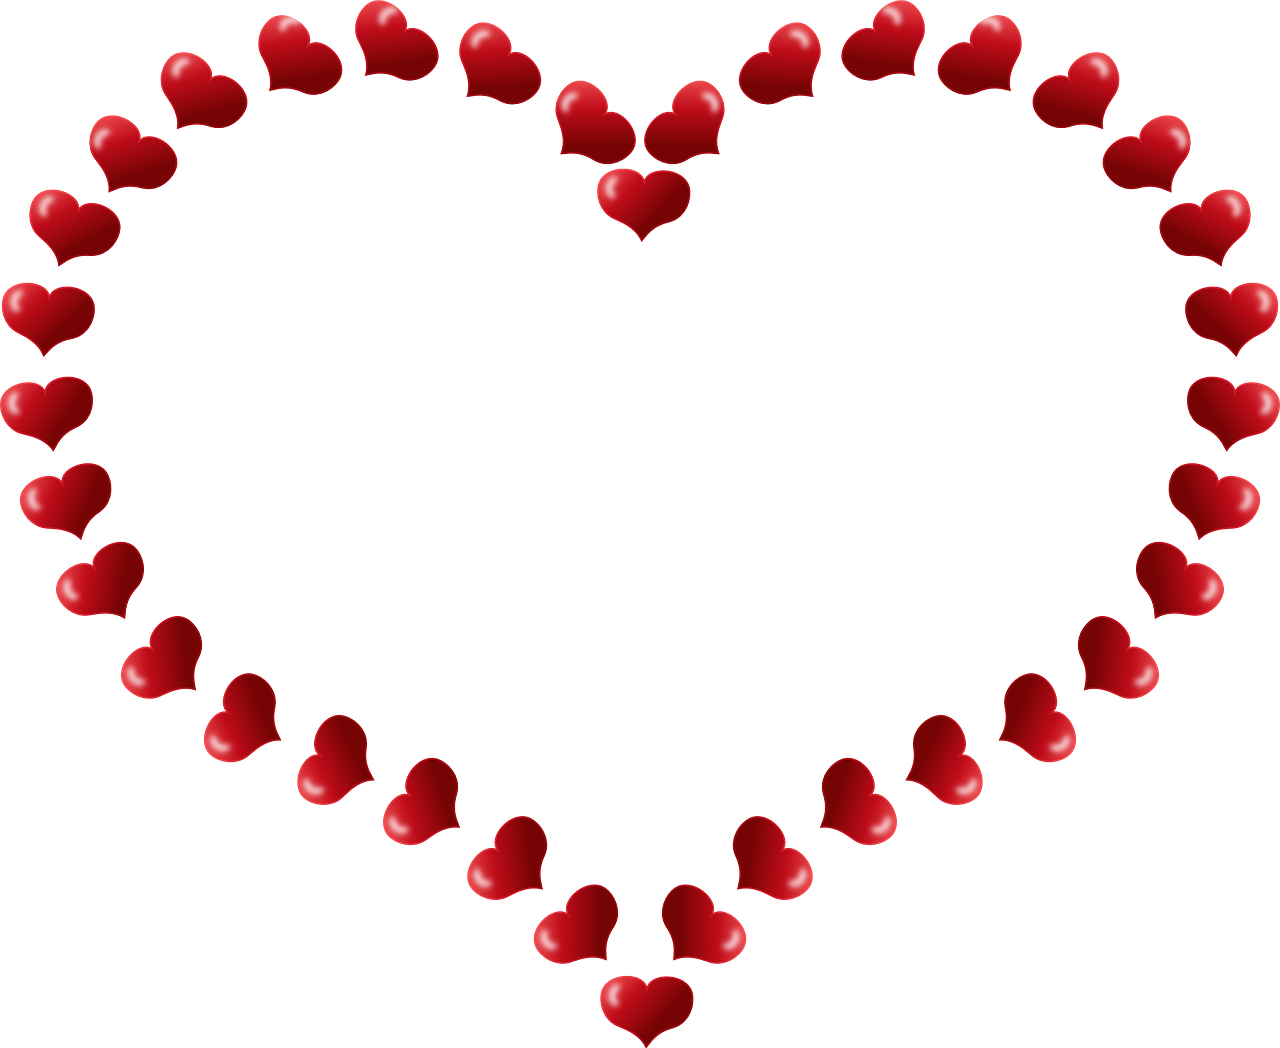 Download Heart, Love, Heart Rate. Royalty-Free Vector Graphic - Pixabay